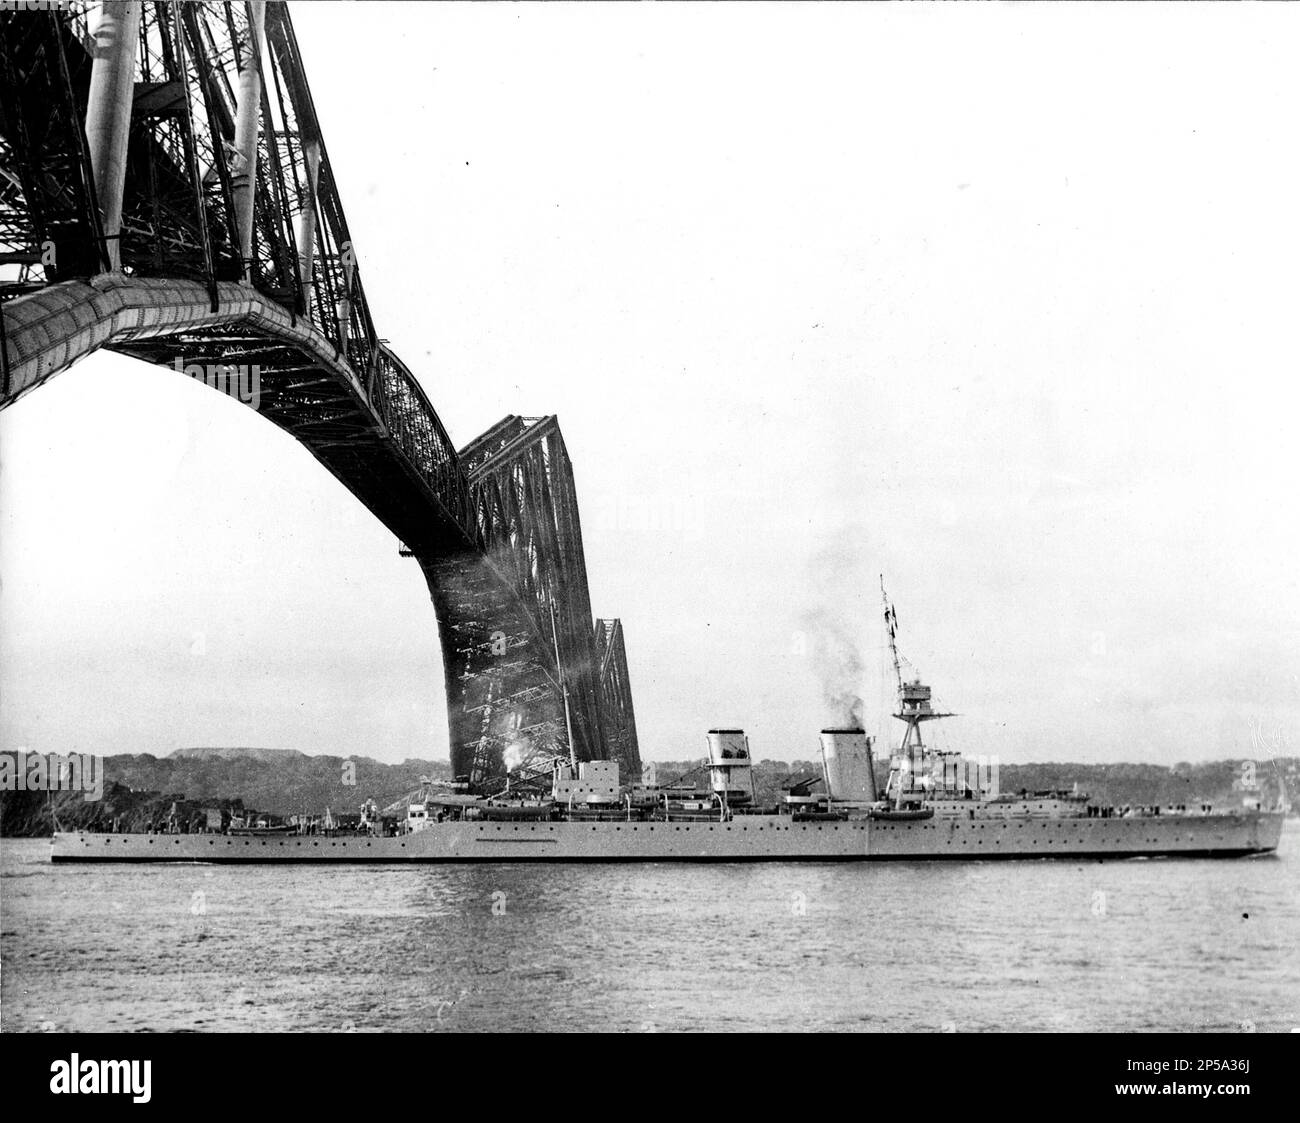 Royal Navy cruiser HMS Frobisher passes under Forth Bridge, 25 May 1937. She will be re-armed at Rosyth Dockyard and put back into operational service. Stock Photo